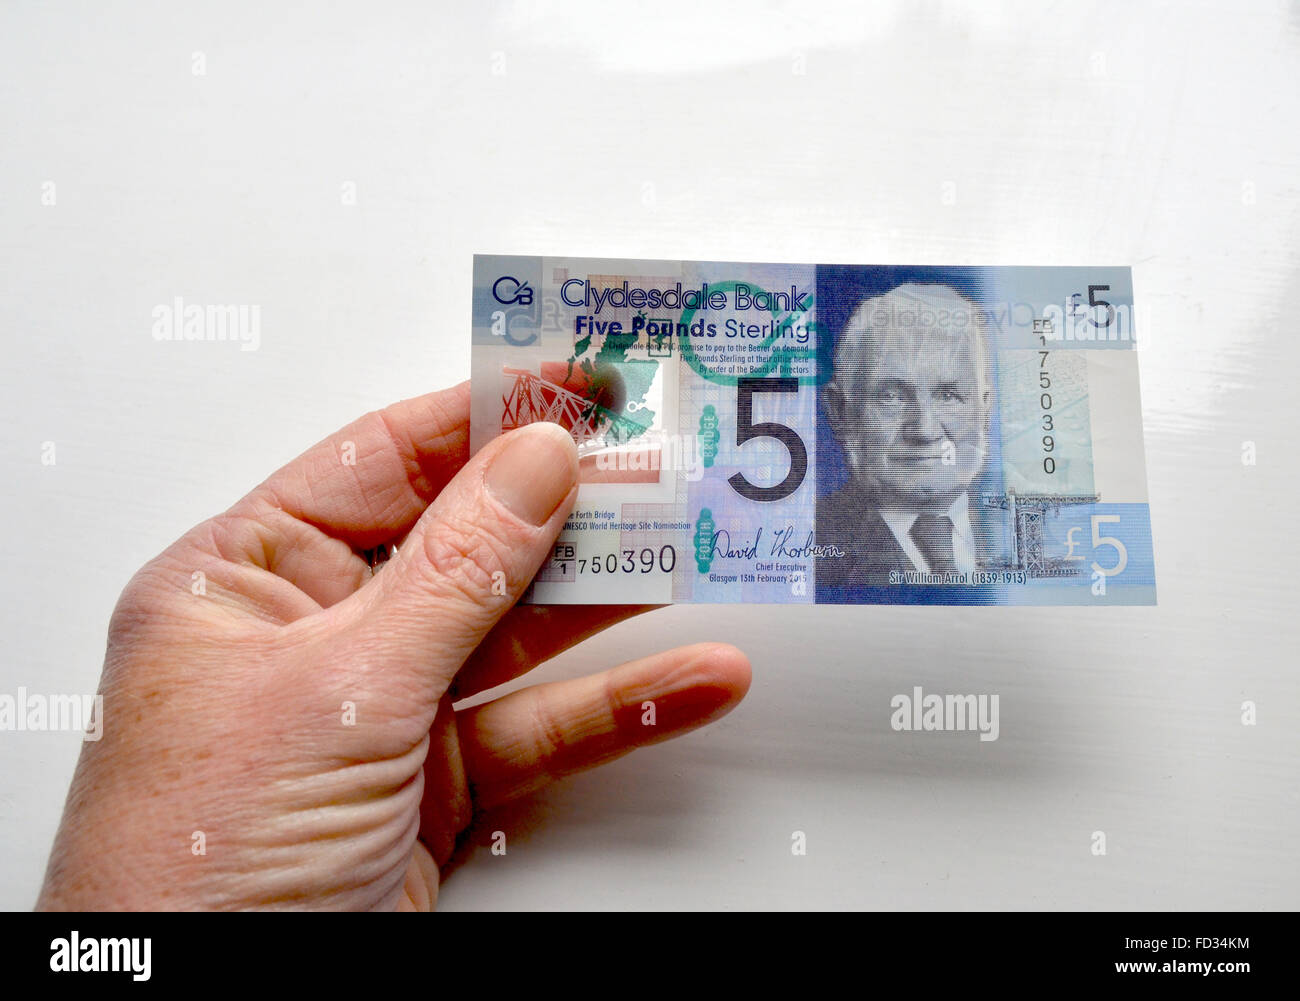 A new Clydesdale bank, 5 pound note held in a hand and revealing a section of its plastic transparent nature. Stock Photo